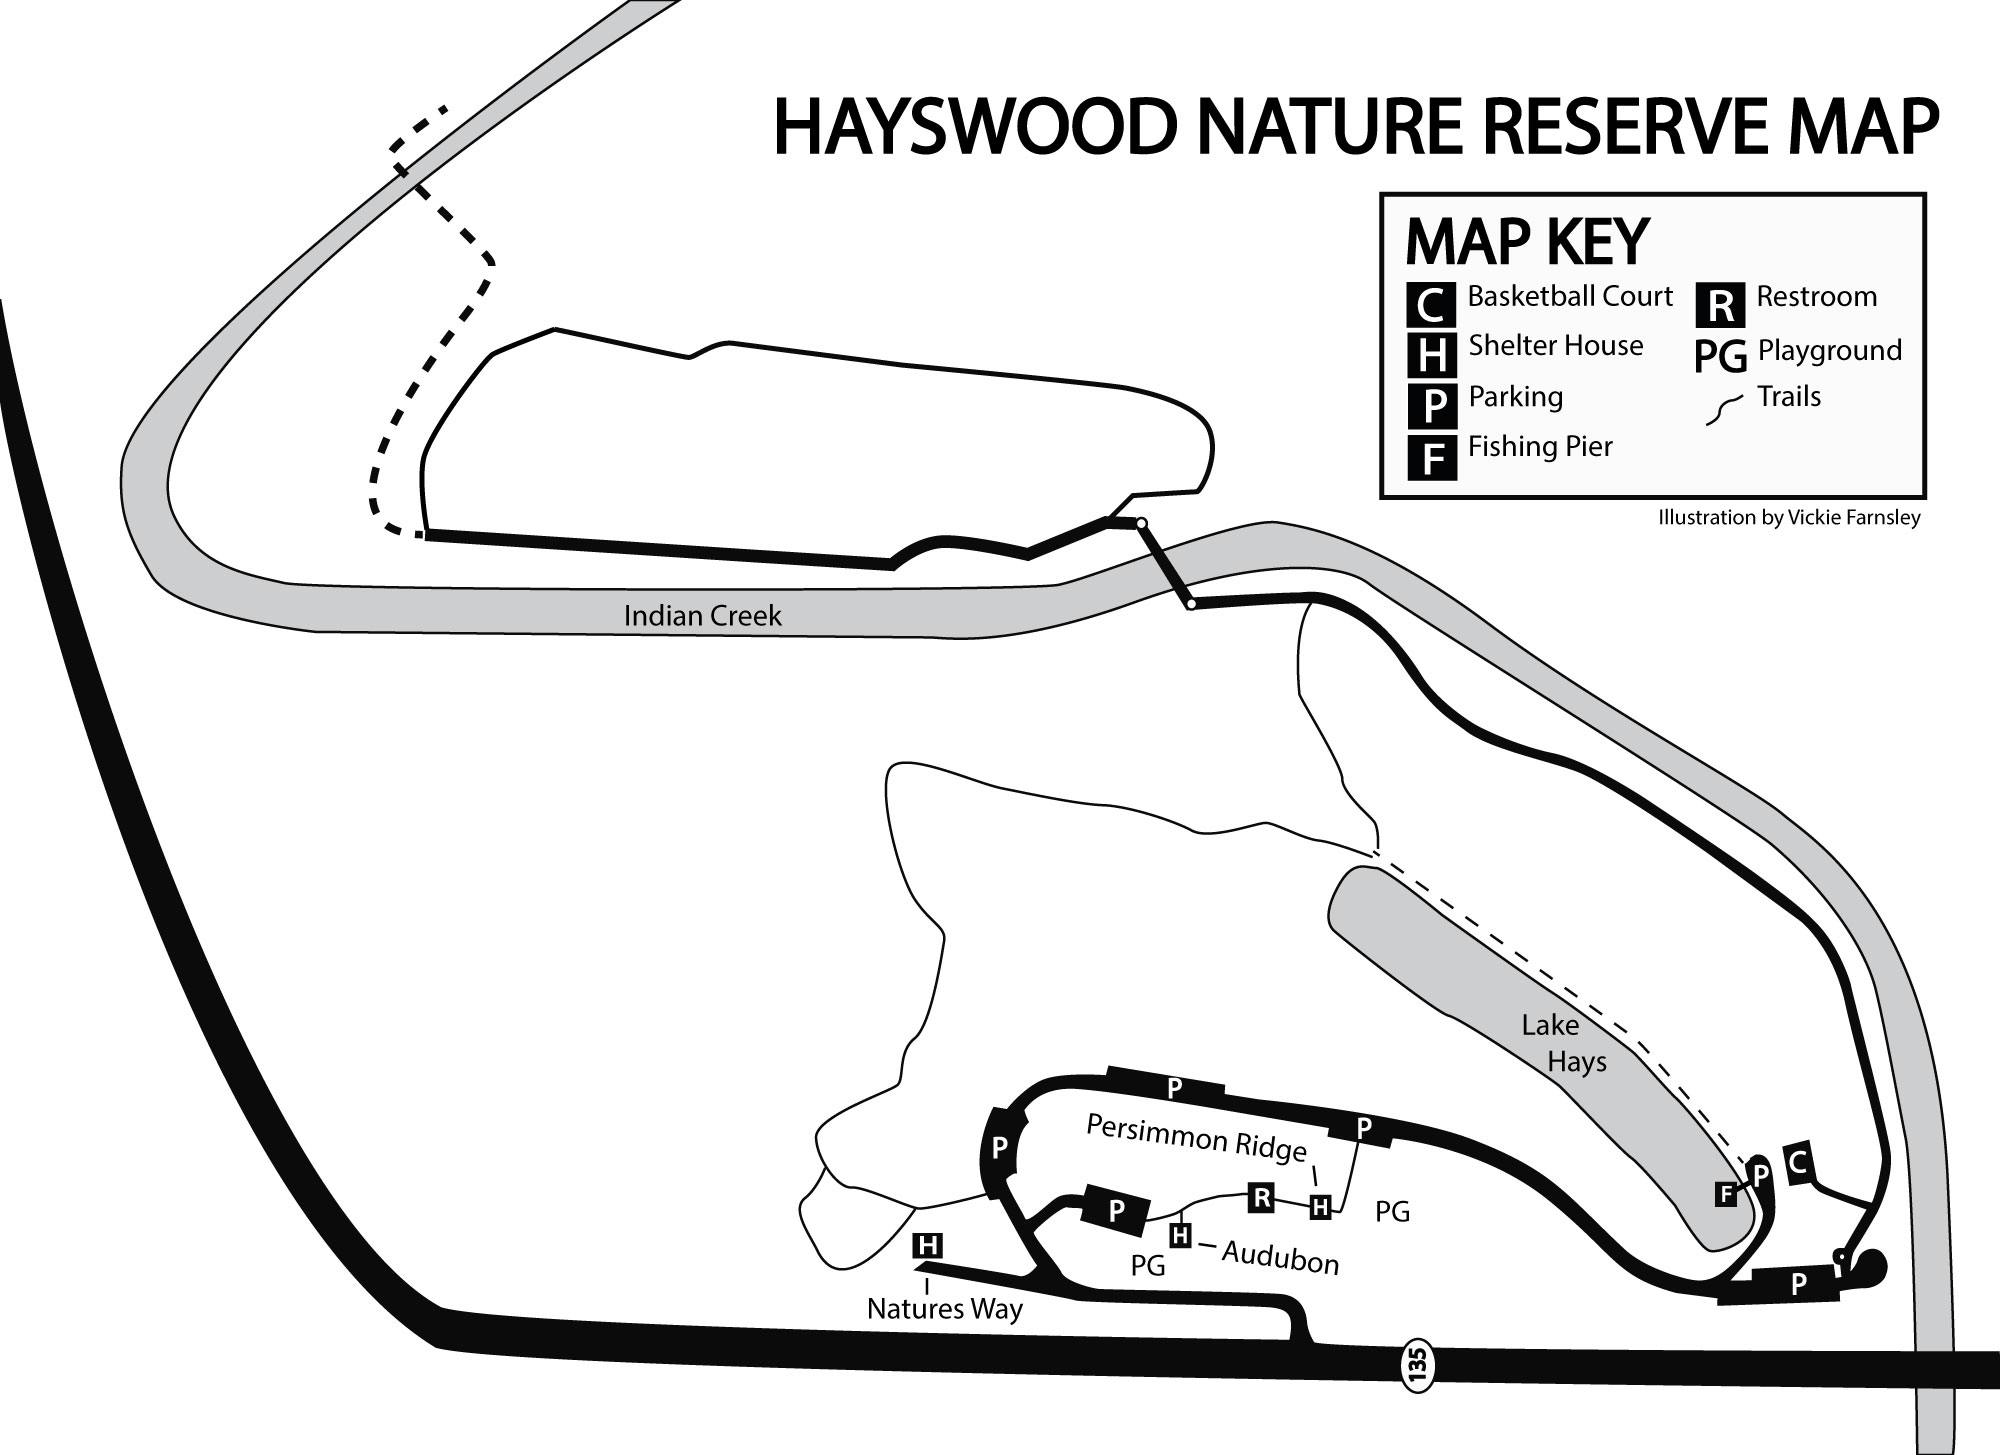 Hayswood Nature Reserve Park Map